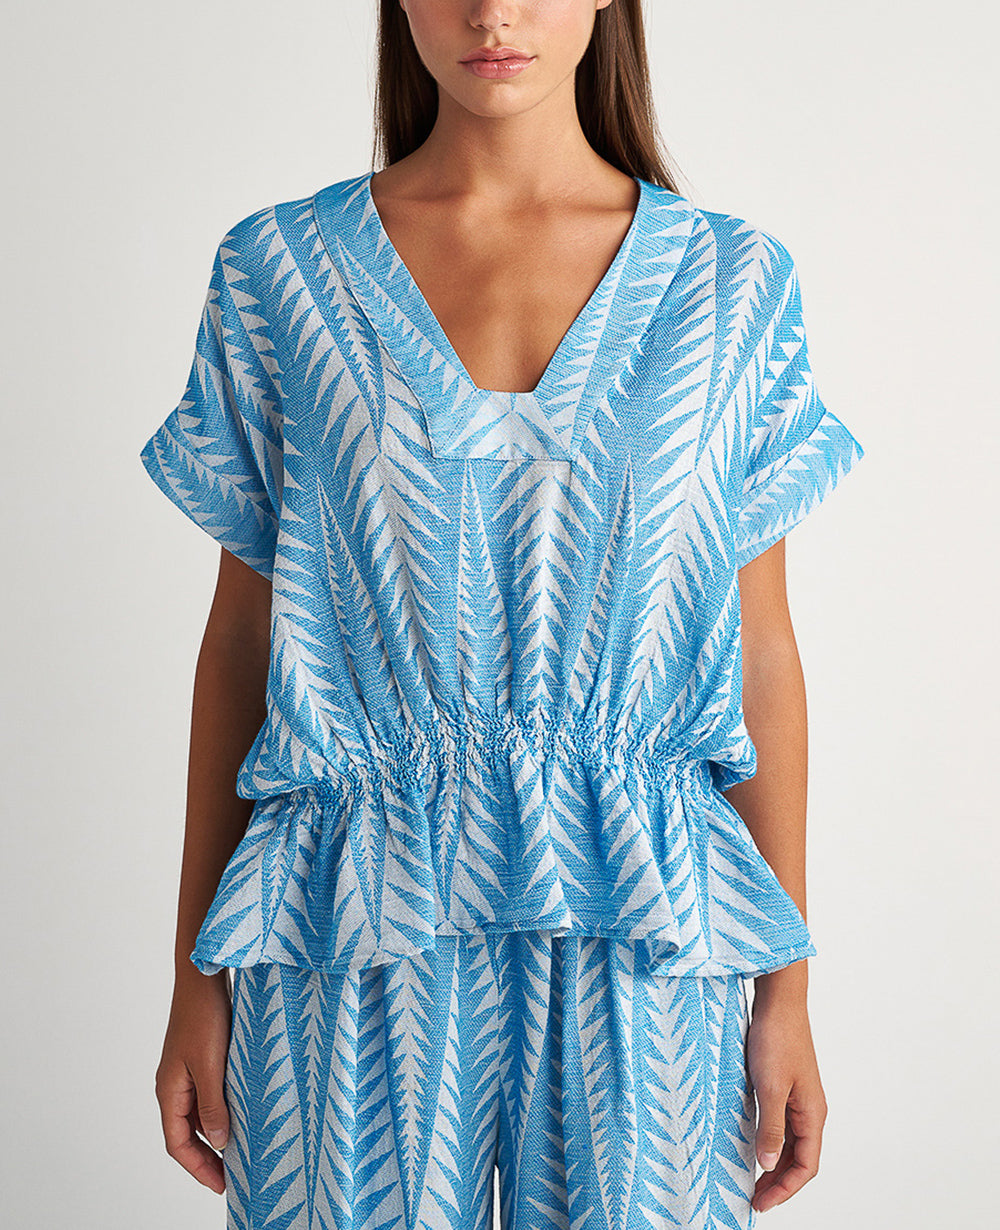 OVERSIZED BLOUSE WITH SHORT SLEEVES "FINIKAS" BLUE